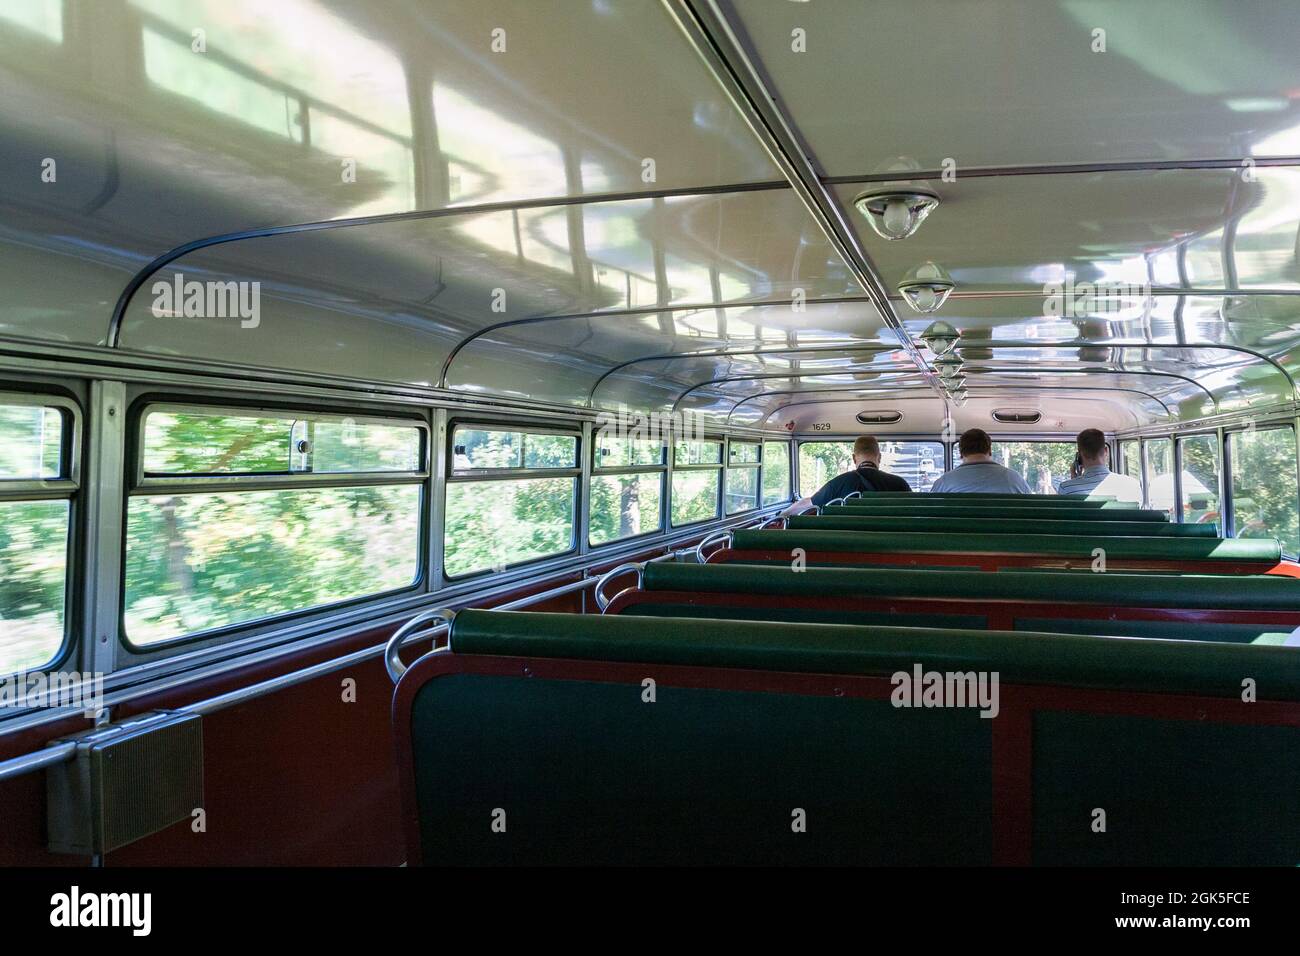 The upper deck of a vintage bus in Berlin Stock Photo